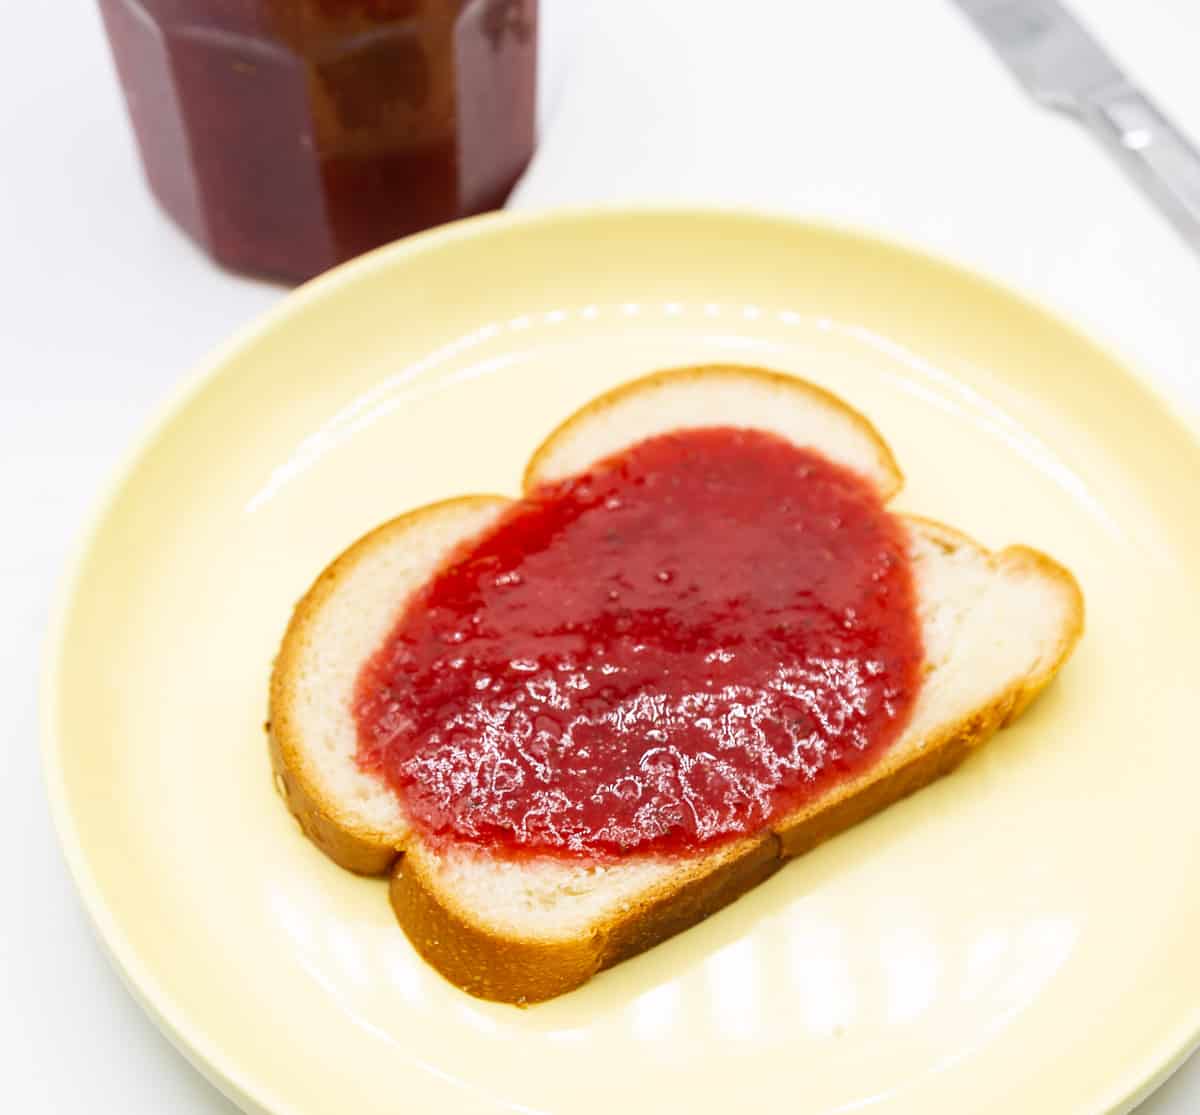 A slice of bread with strawberry jam.